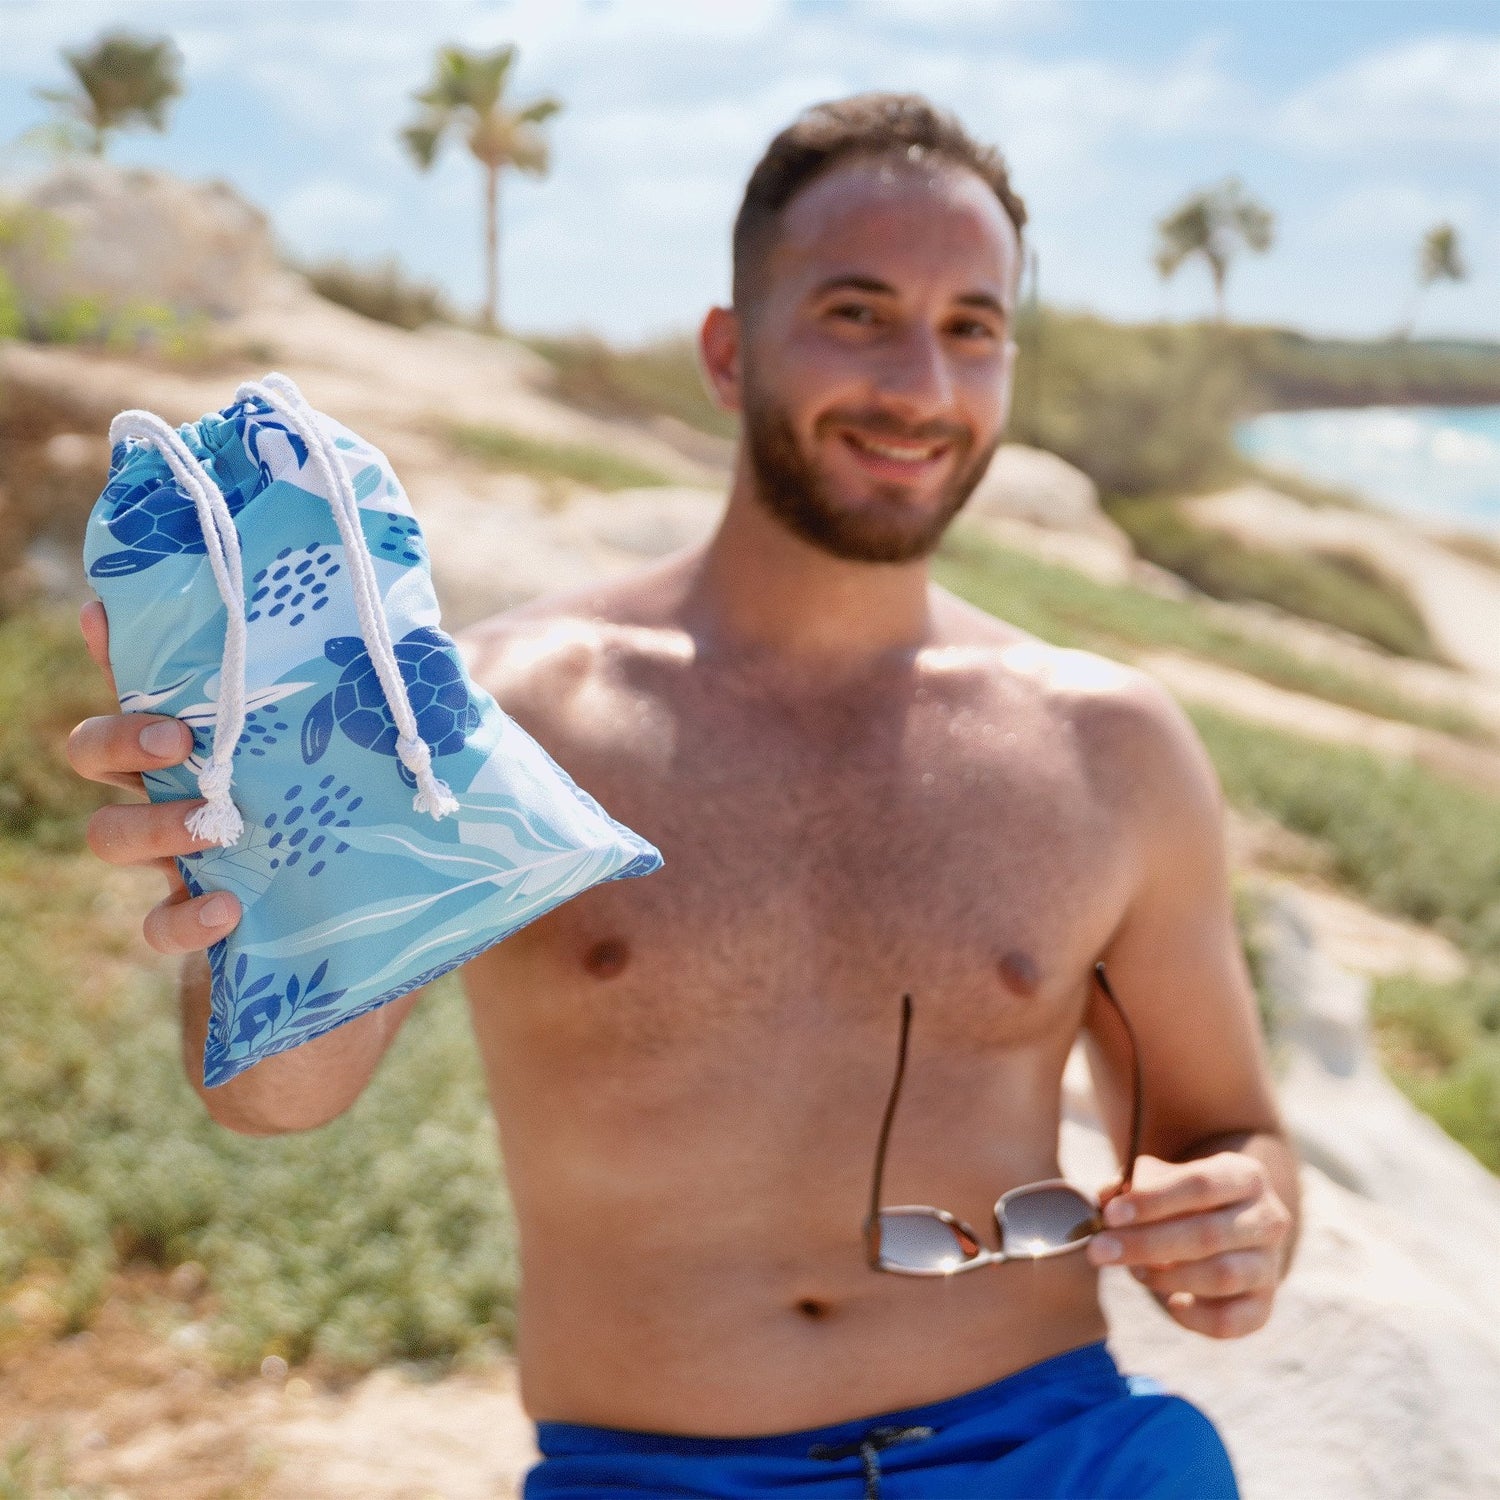 A guy holding a Quick Dry, Sand Free, Light Weight, Compact and Ecofriendly Microfiber Beach Towel pouch from La Toalla